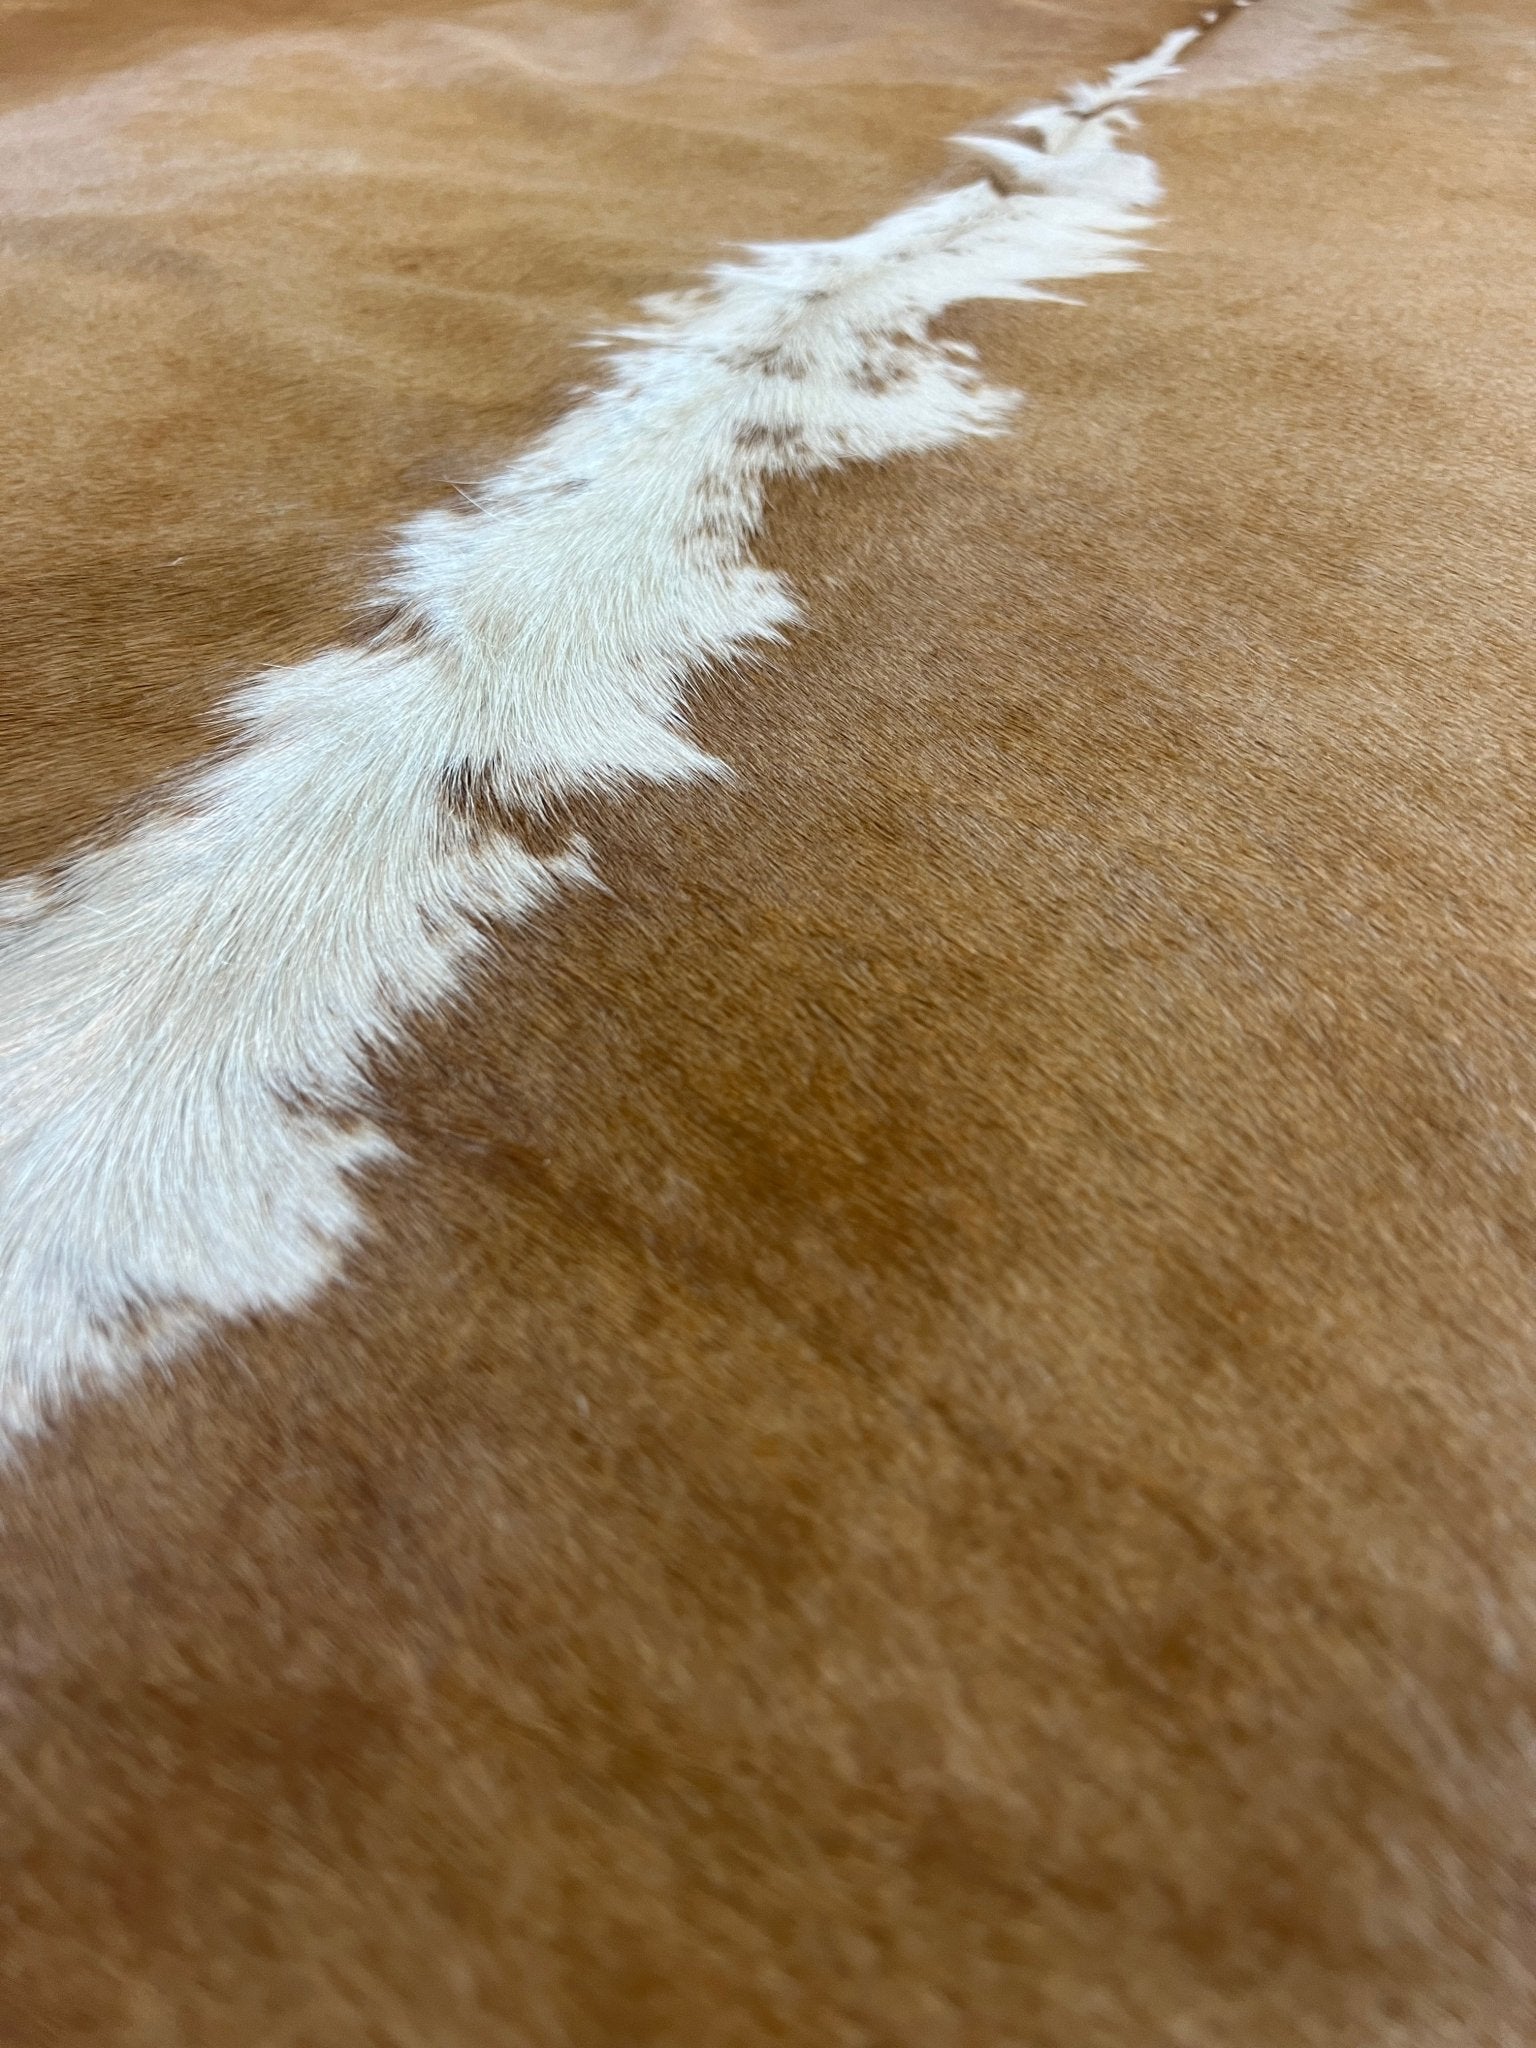 Exotic 5.8x6.4 Large Cowhide Rug | Banana Manor Rug Factory Outlet